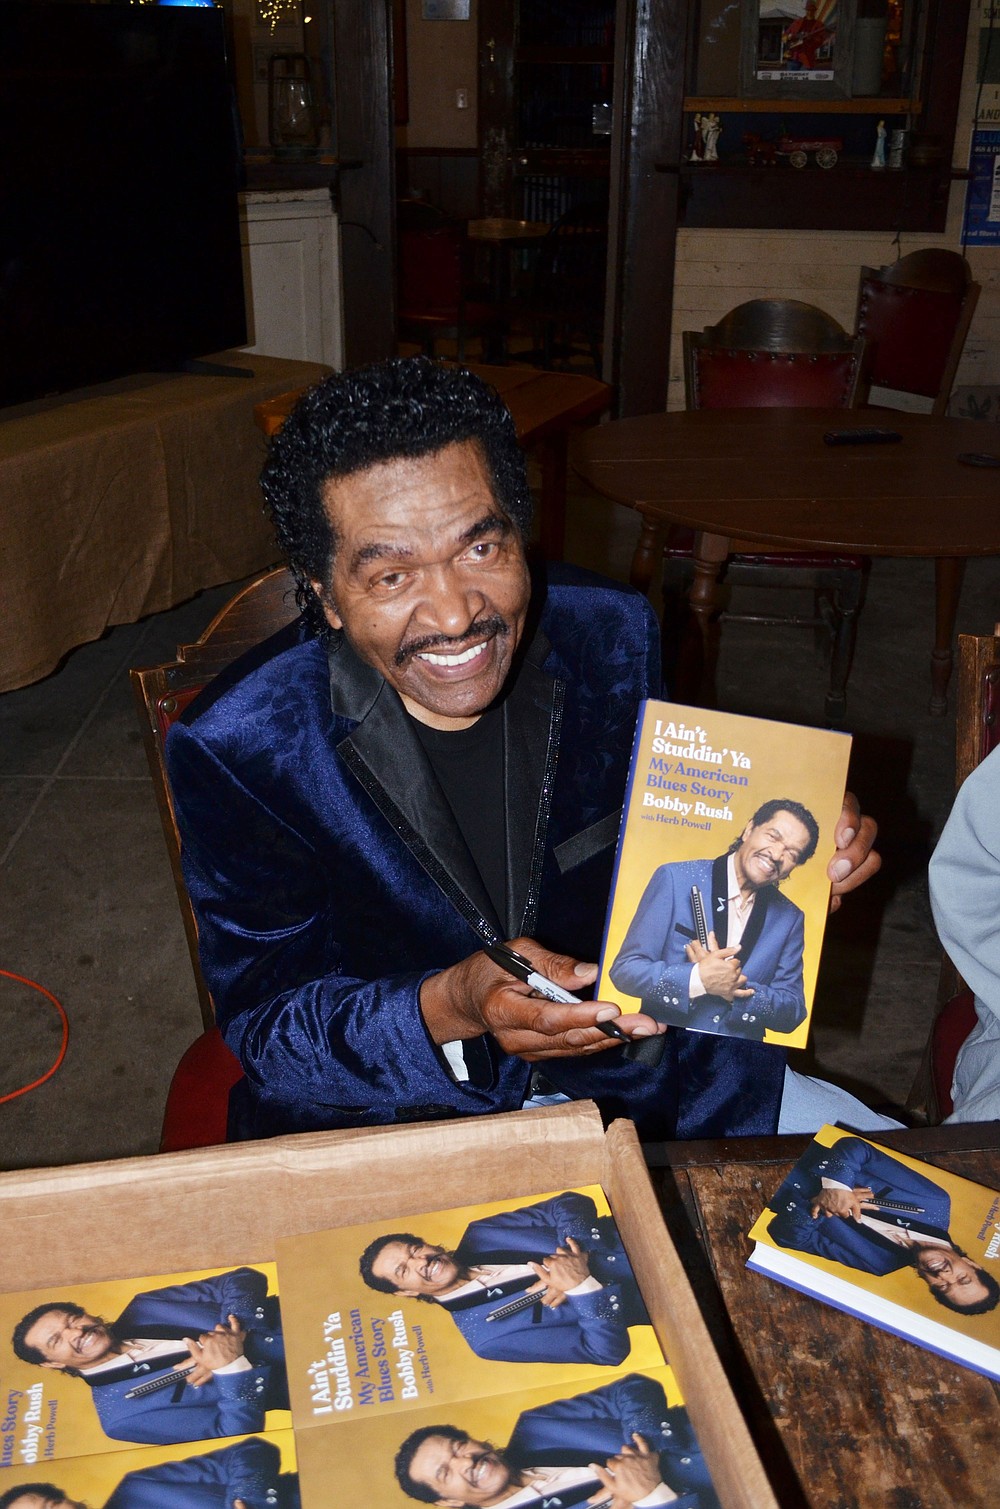 Bobby Rush's 'Ain't Studdin' Ya/My American Blues Story' was released three months ago. (Special to The Commercial/Richard Ledbetter)